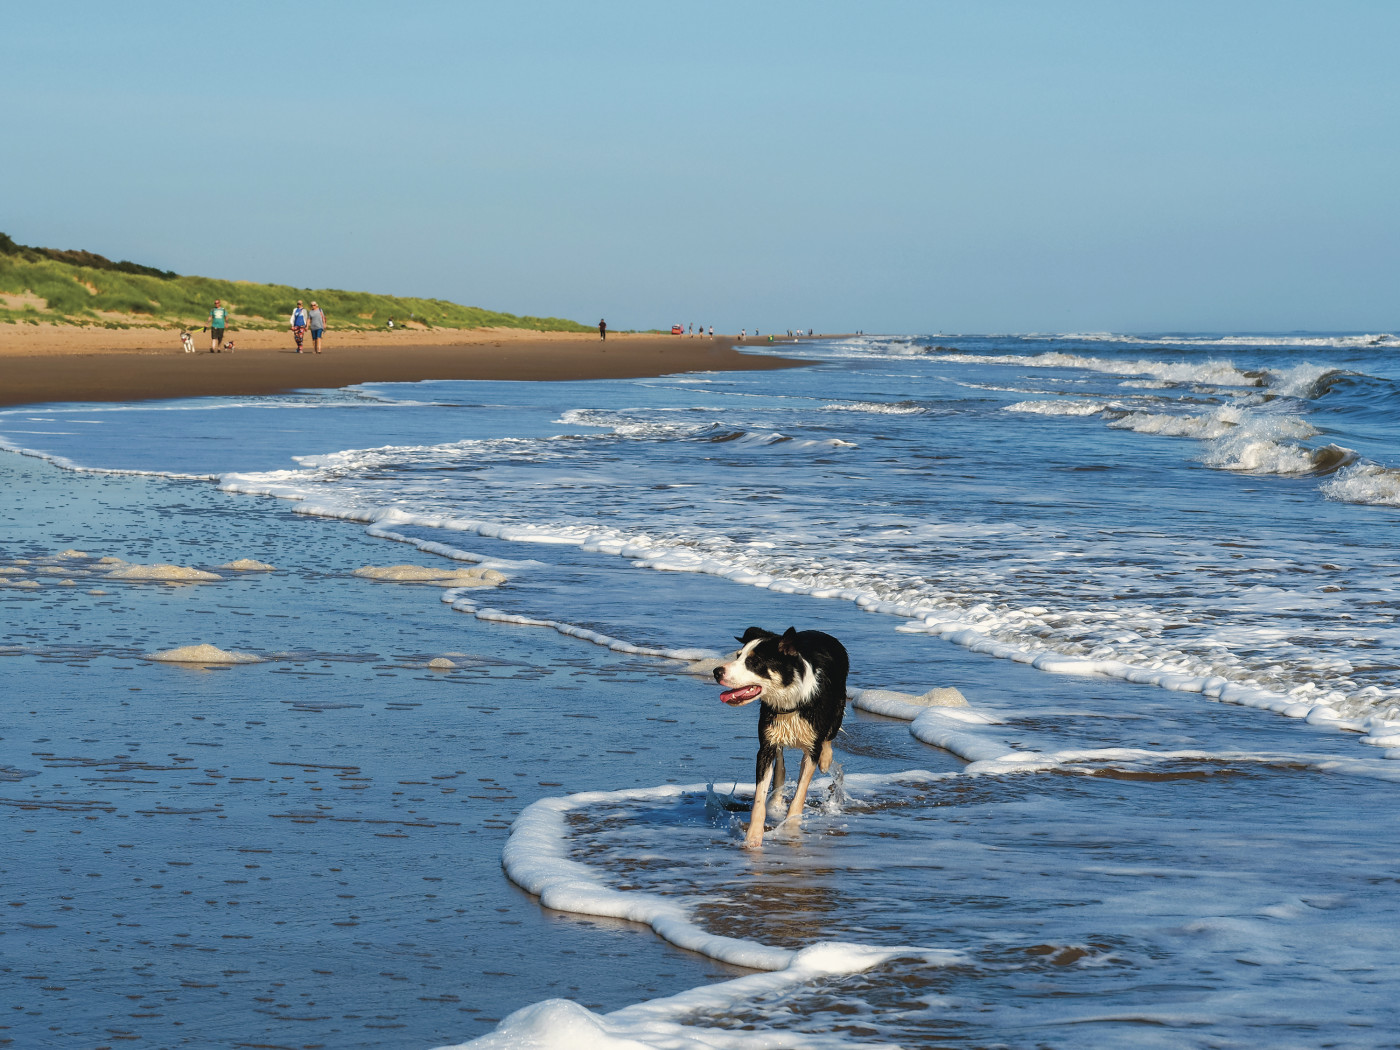 Mablethorpe beach, Lincolnshire